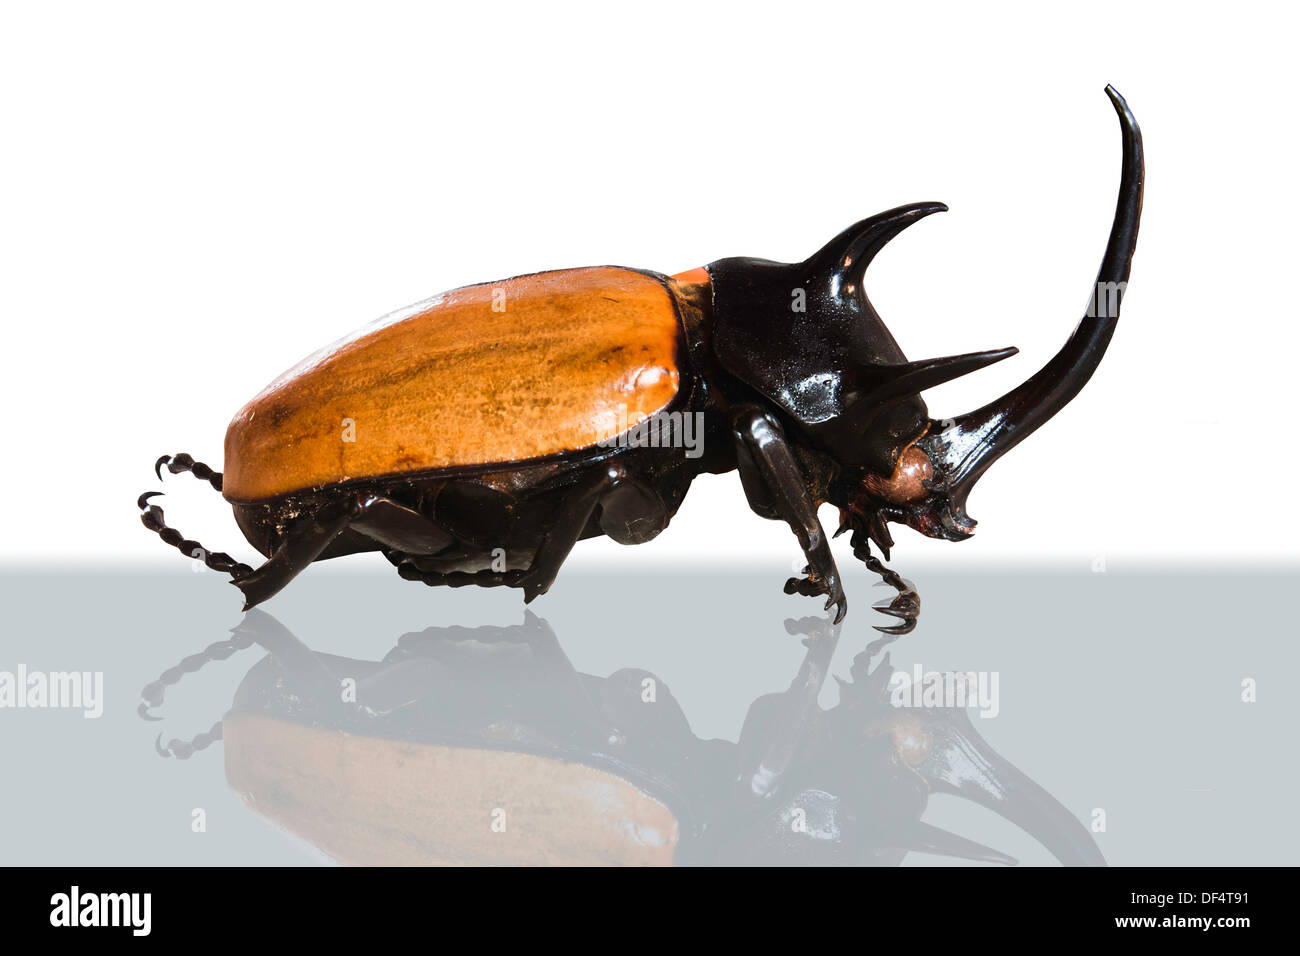 animal, antenna, backgrounds, beauty, beetle, big, bite, black, brown, bug, case, claw, close, closeup, clotures, color, danger Stock Photo